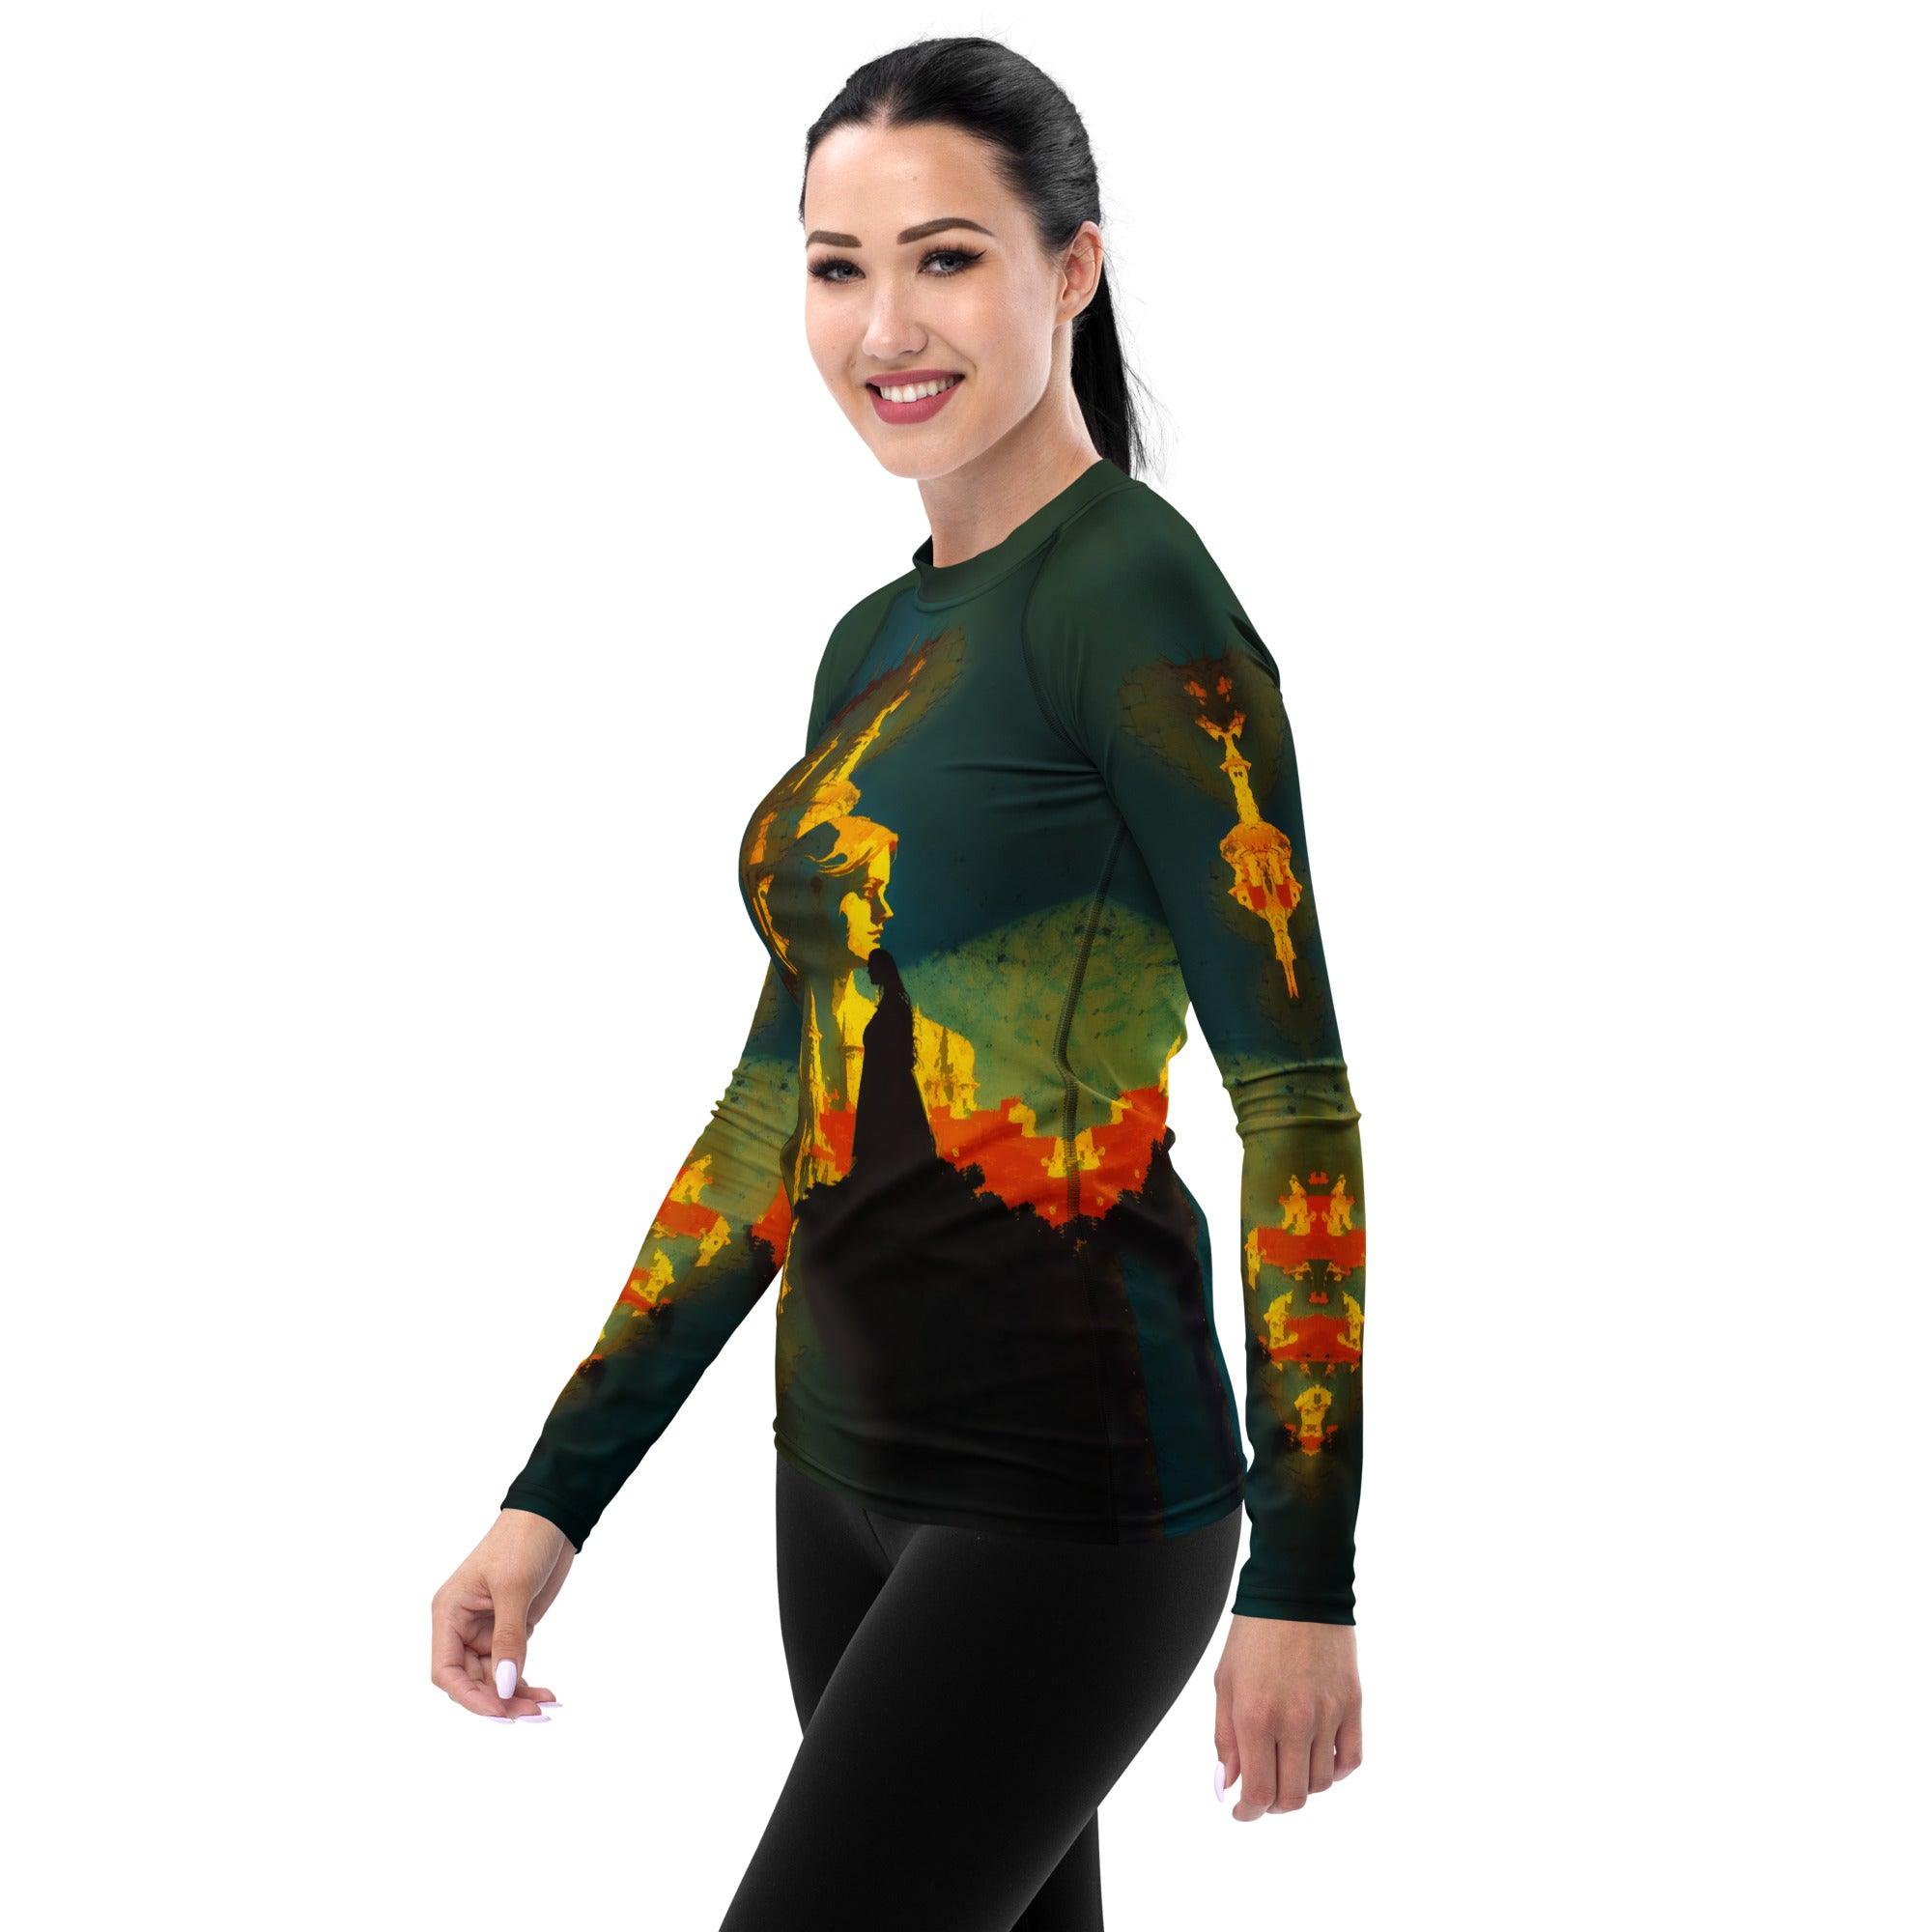 Active woman in SurArt 68 Women's Rash Guard ready for water adventure